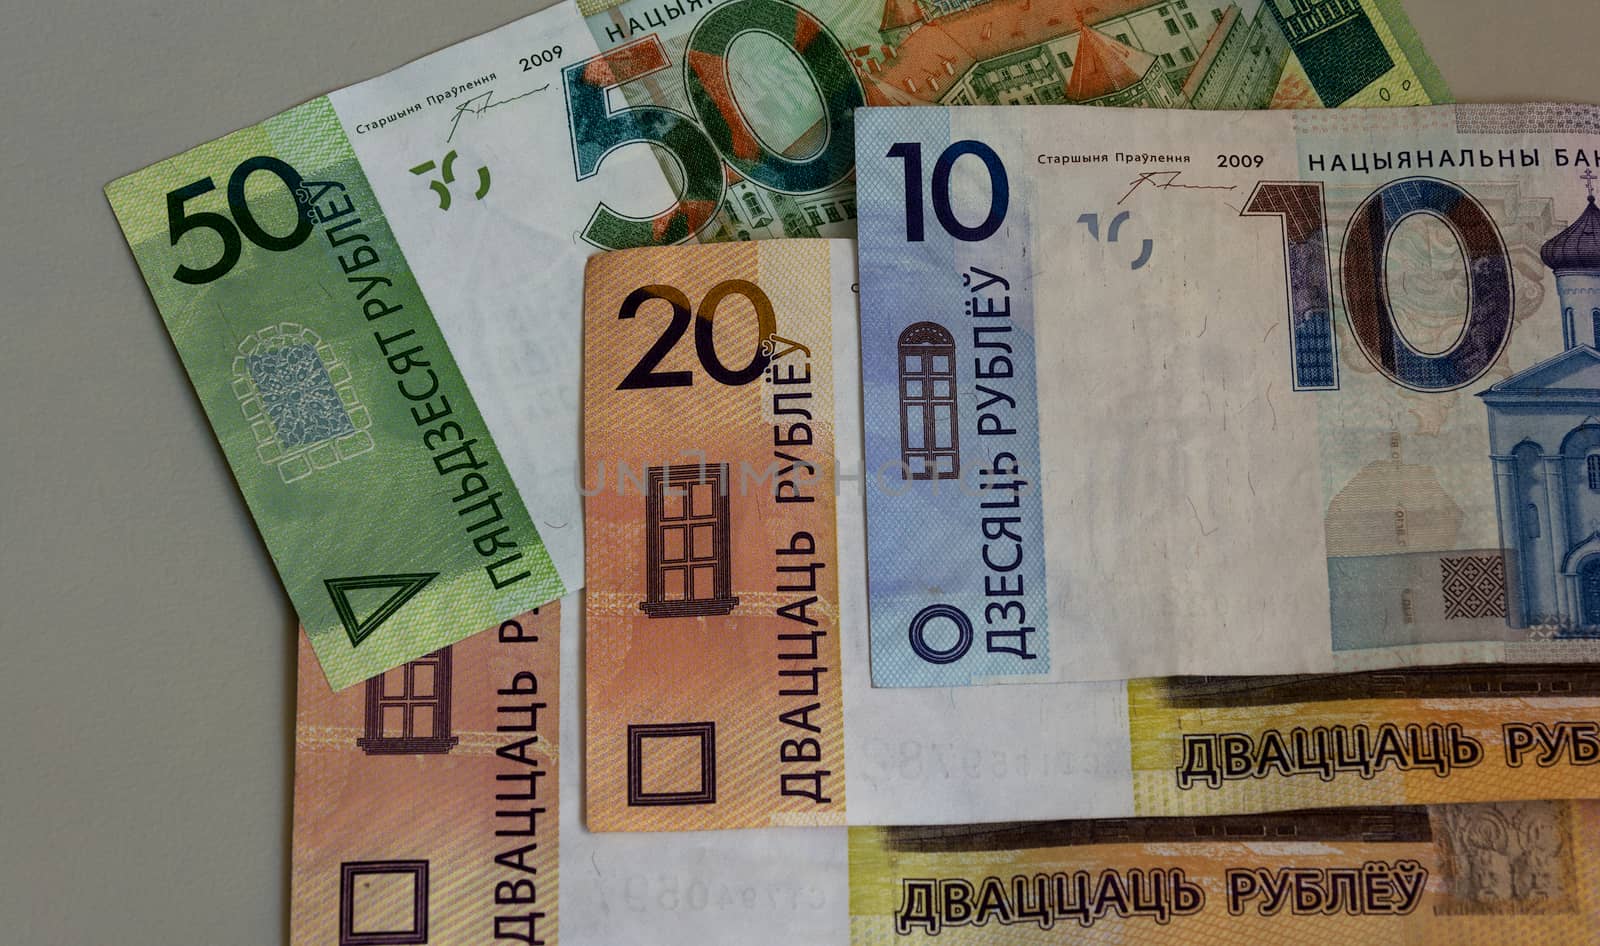 Image of the banknotes of the Republic of Belarus National Bank  by Grommik